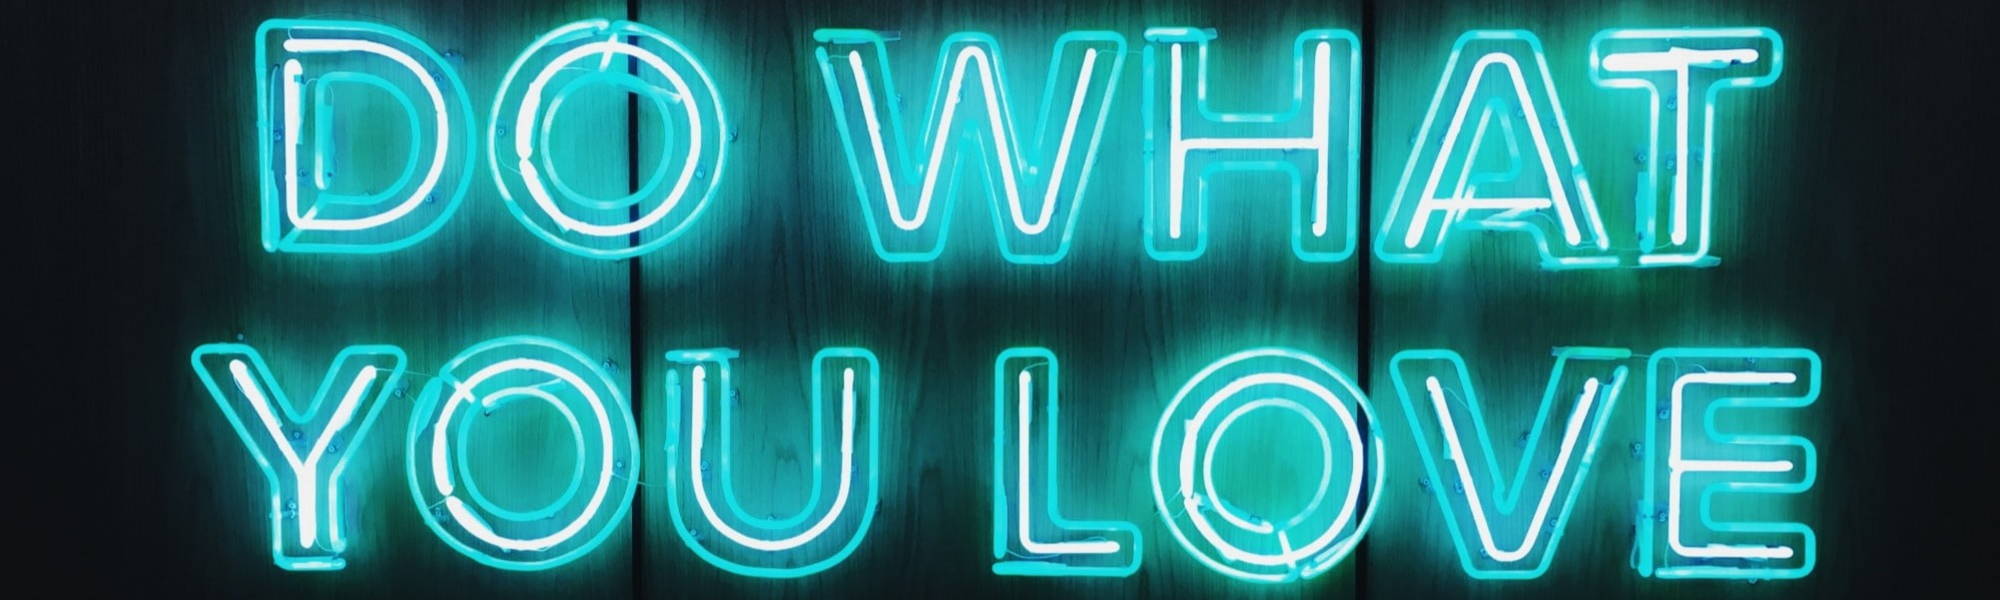 Do What You Love in blue neon writing